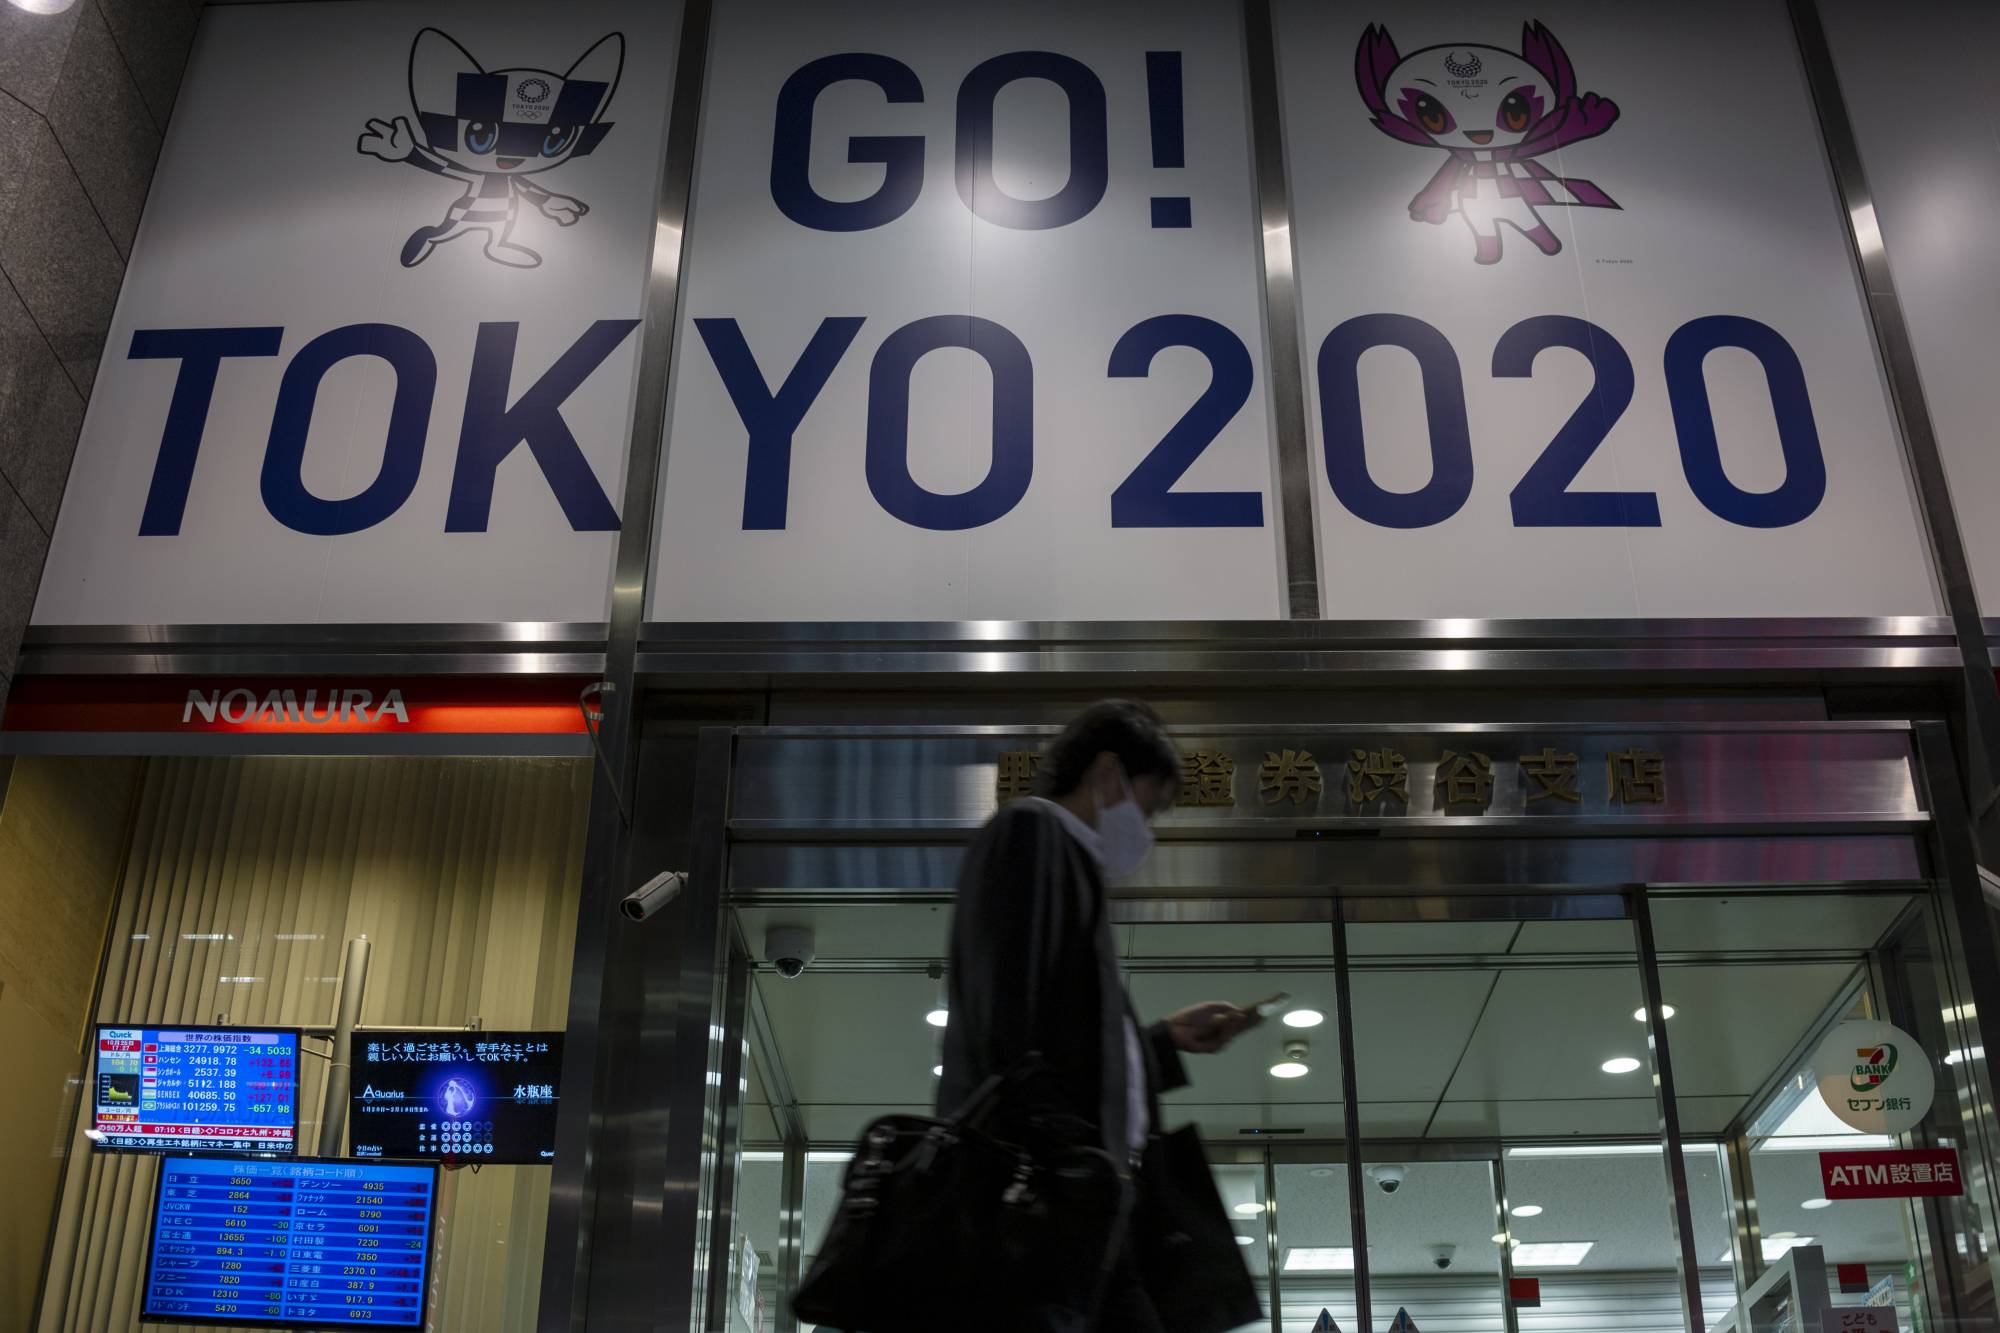 NBCUniversal to Broadcast Record 1,200 Hours of Tokyo 2020 Paralympic Games